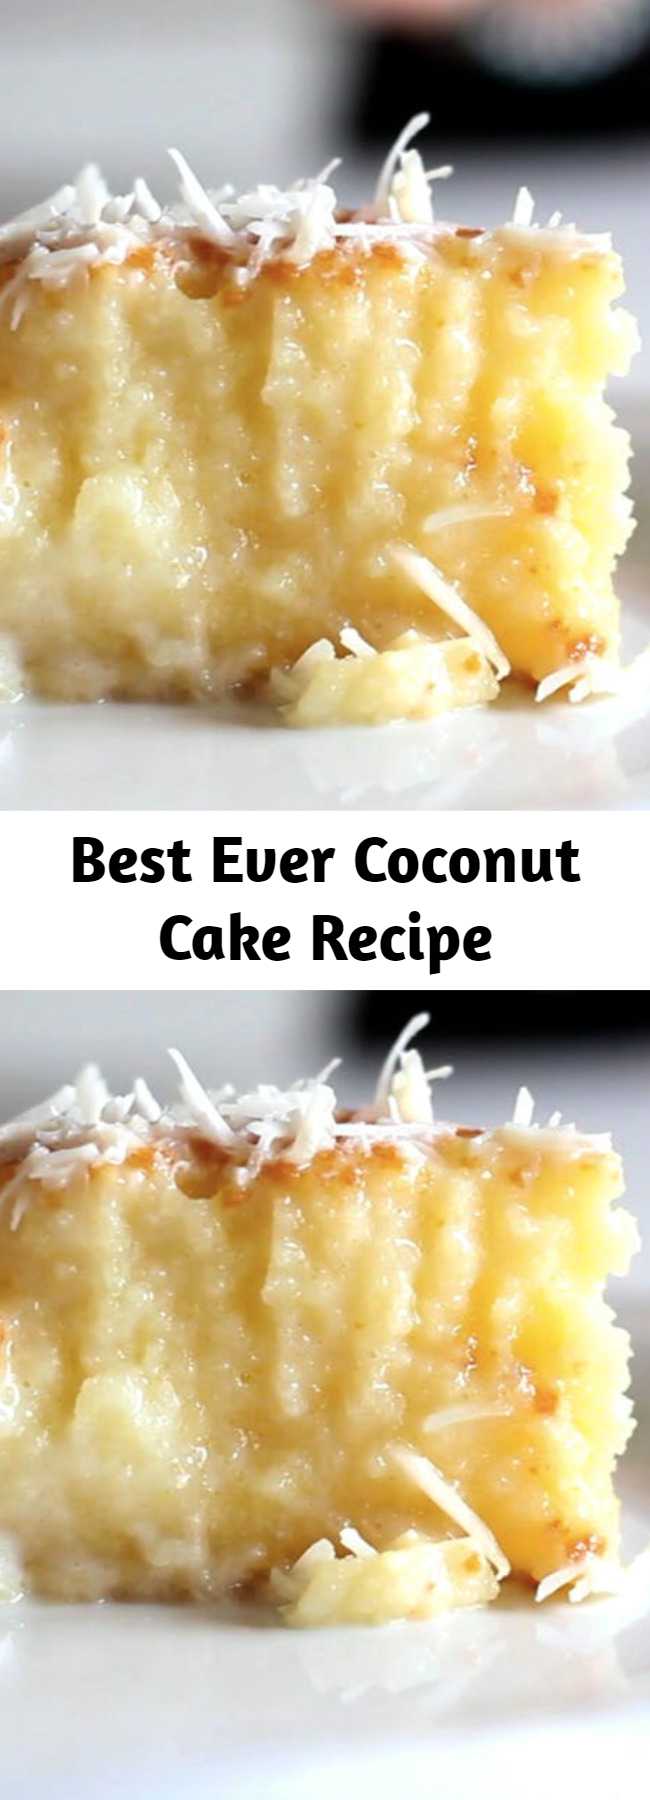 Best Ever Coconut Cake Recipe - A cake with a rich coconut base and grated coconut topping.